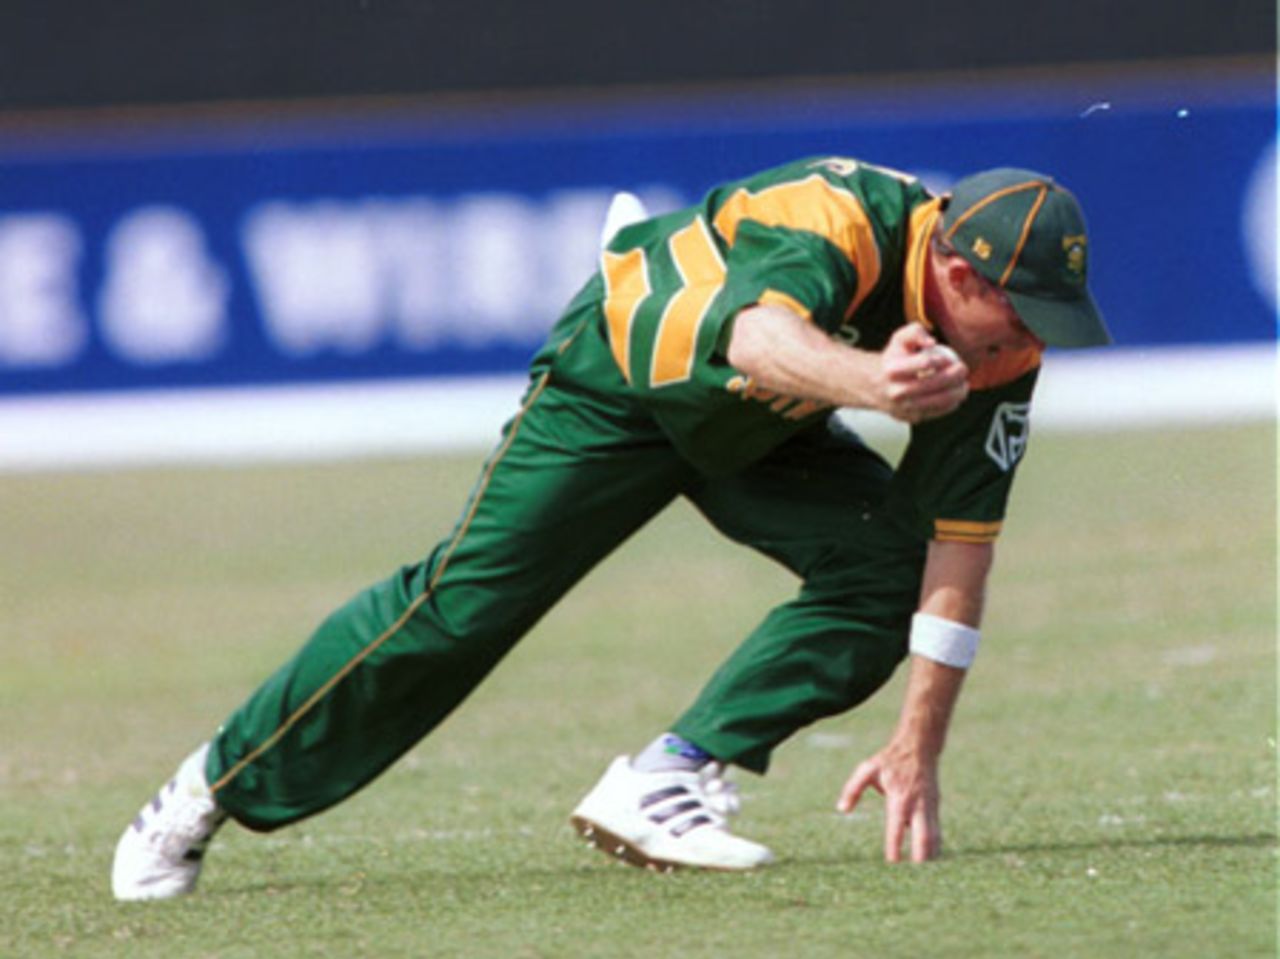 Jonty Rhodes gets up after catching holds on, 4th ODI at Queen's Park (New) St George's, Grenada , 6th May 2001